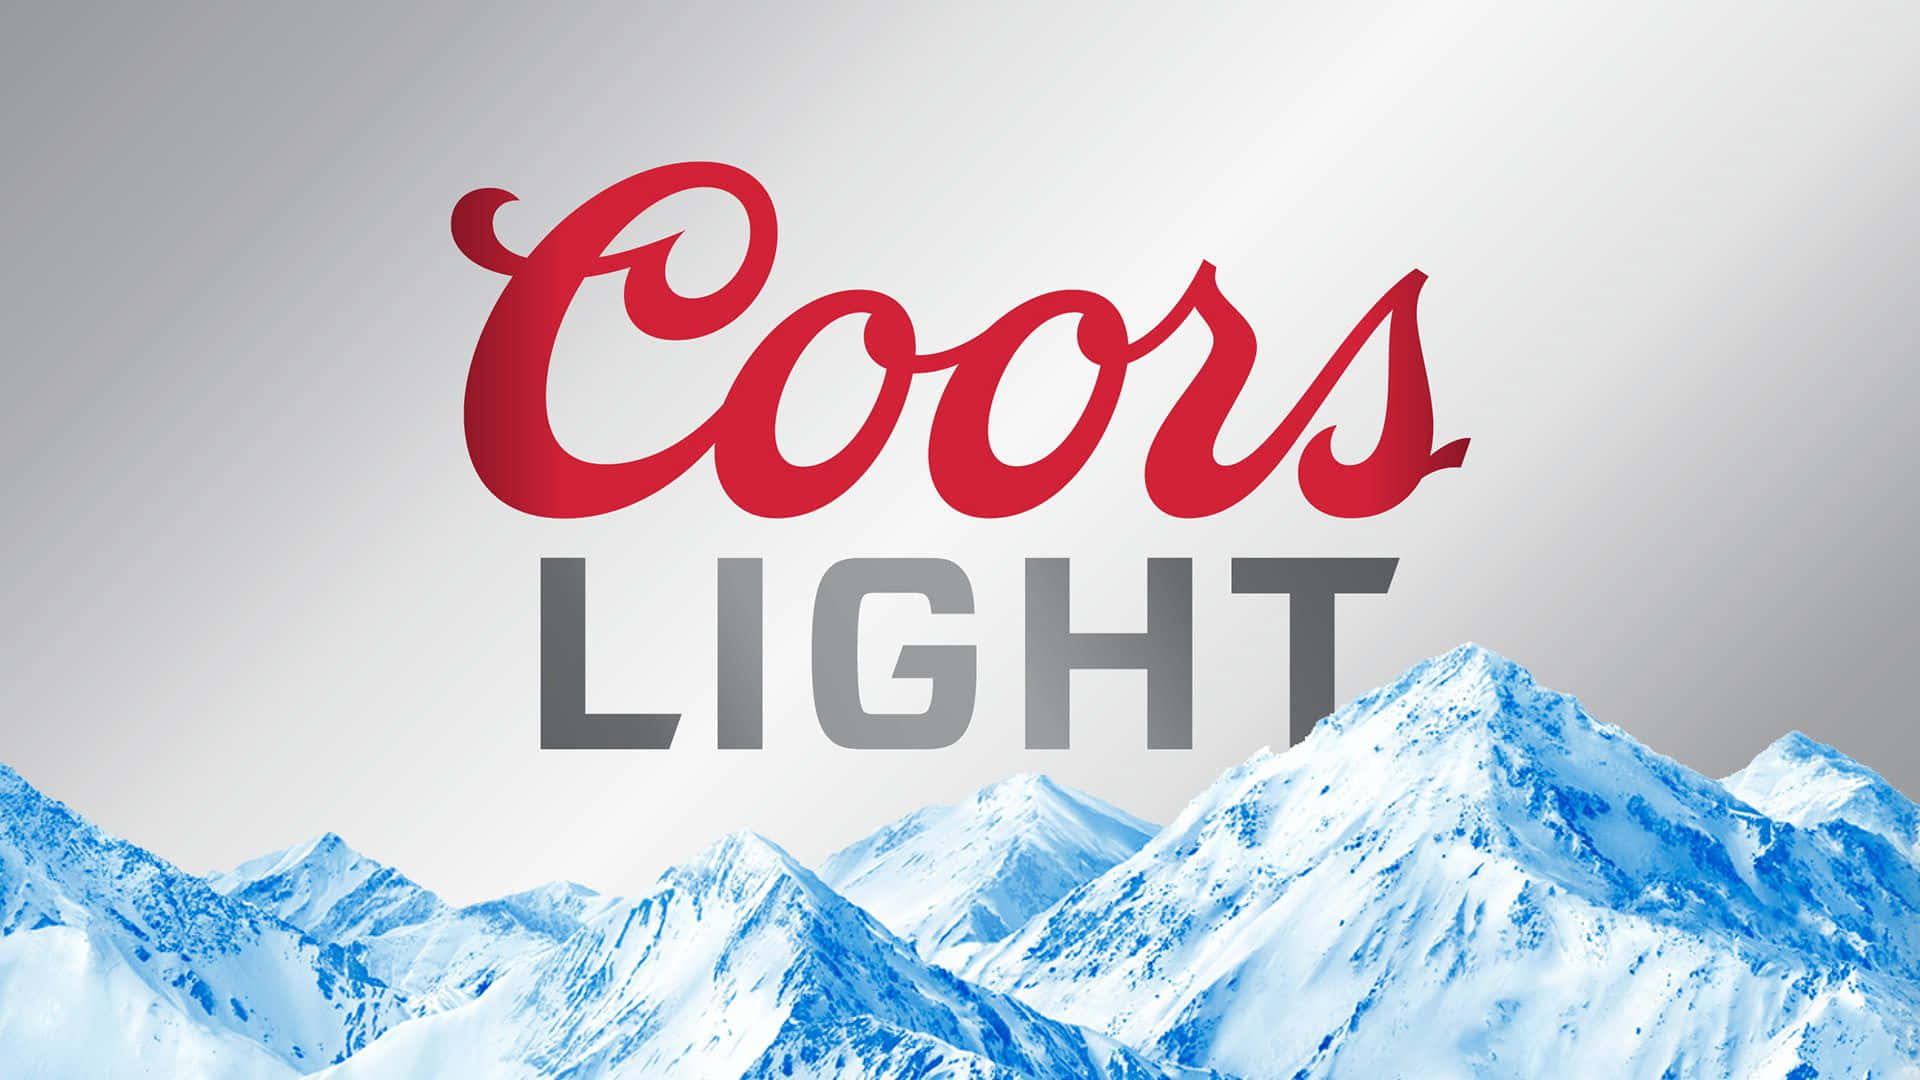 "Refresh yourself with chilled Coors Light" Wallpaper